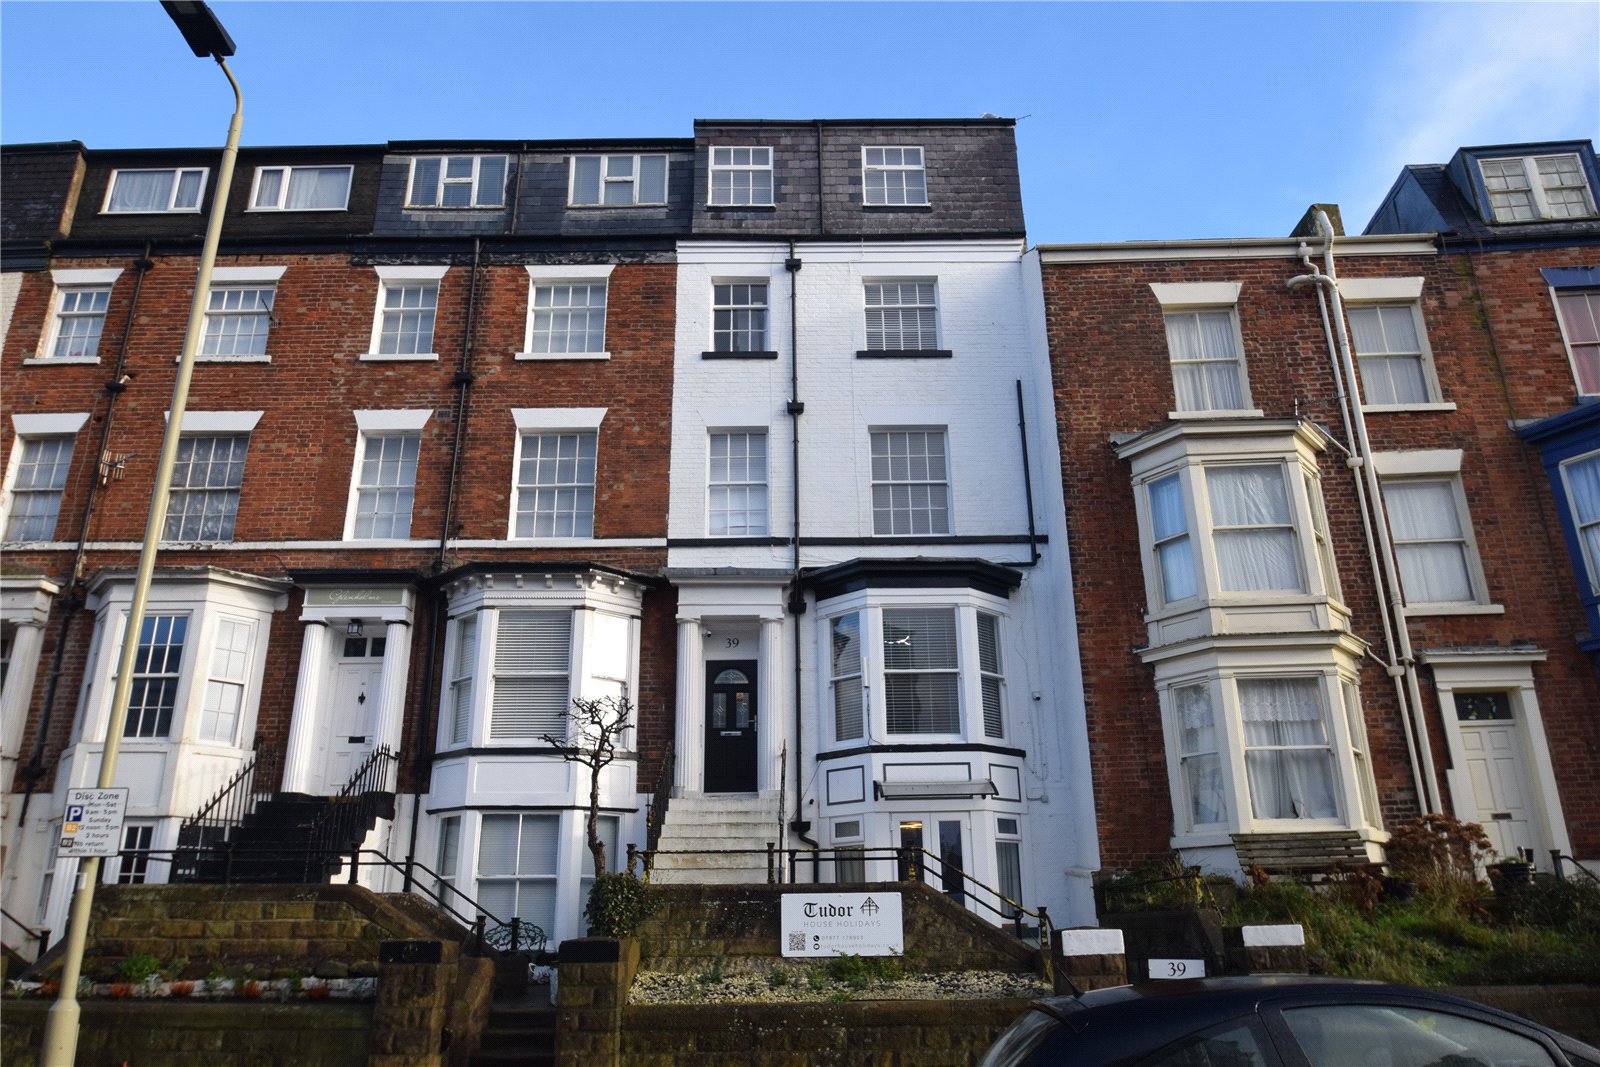 11 bed house for sale in North Marine Road, Scarborough - Property Image 1